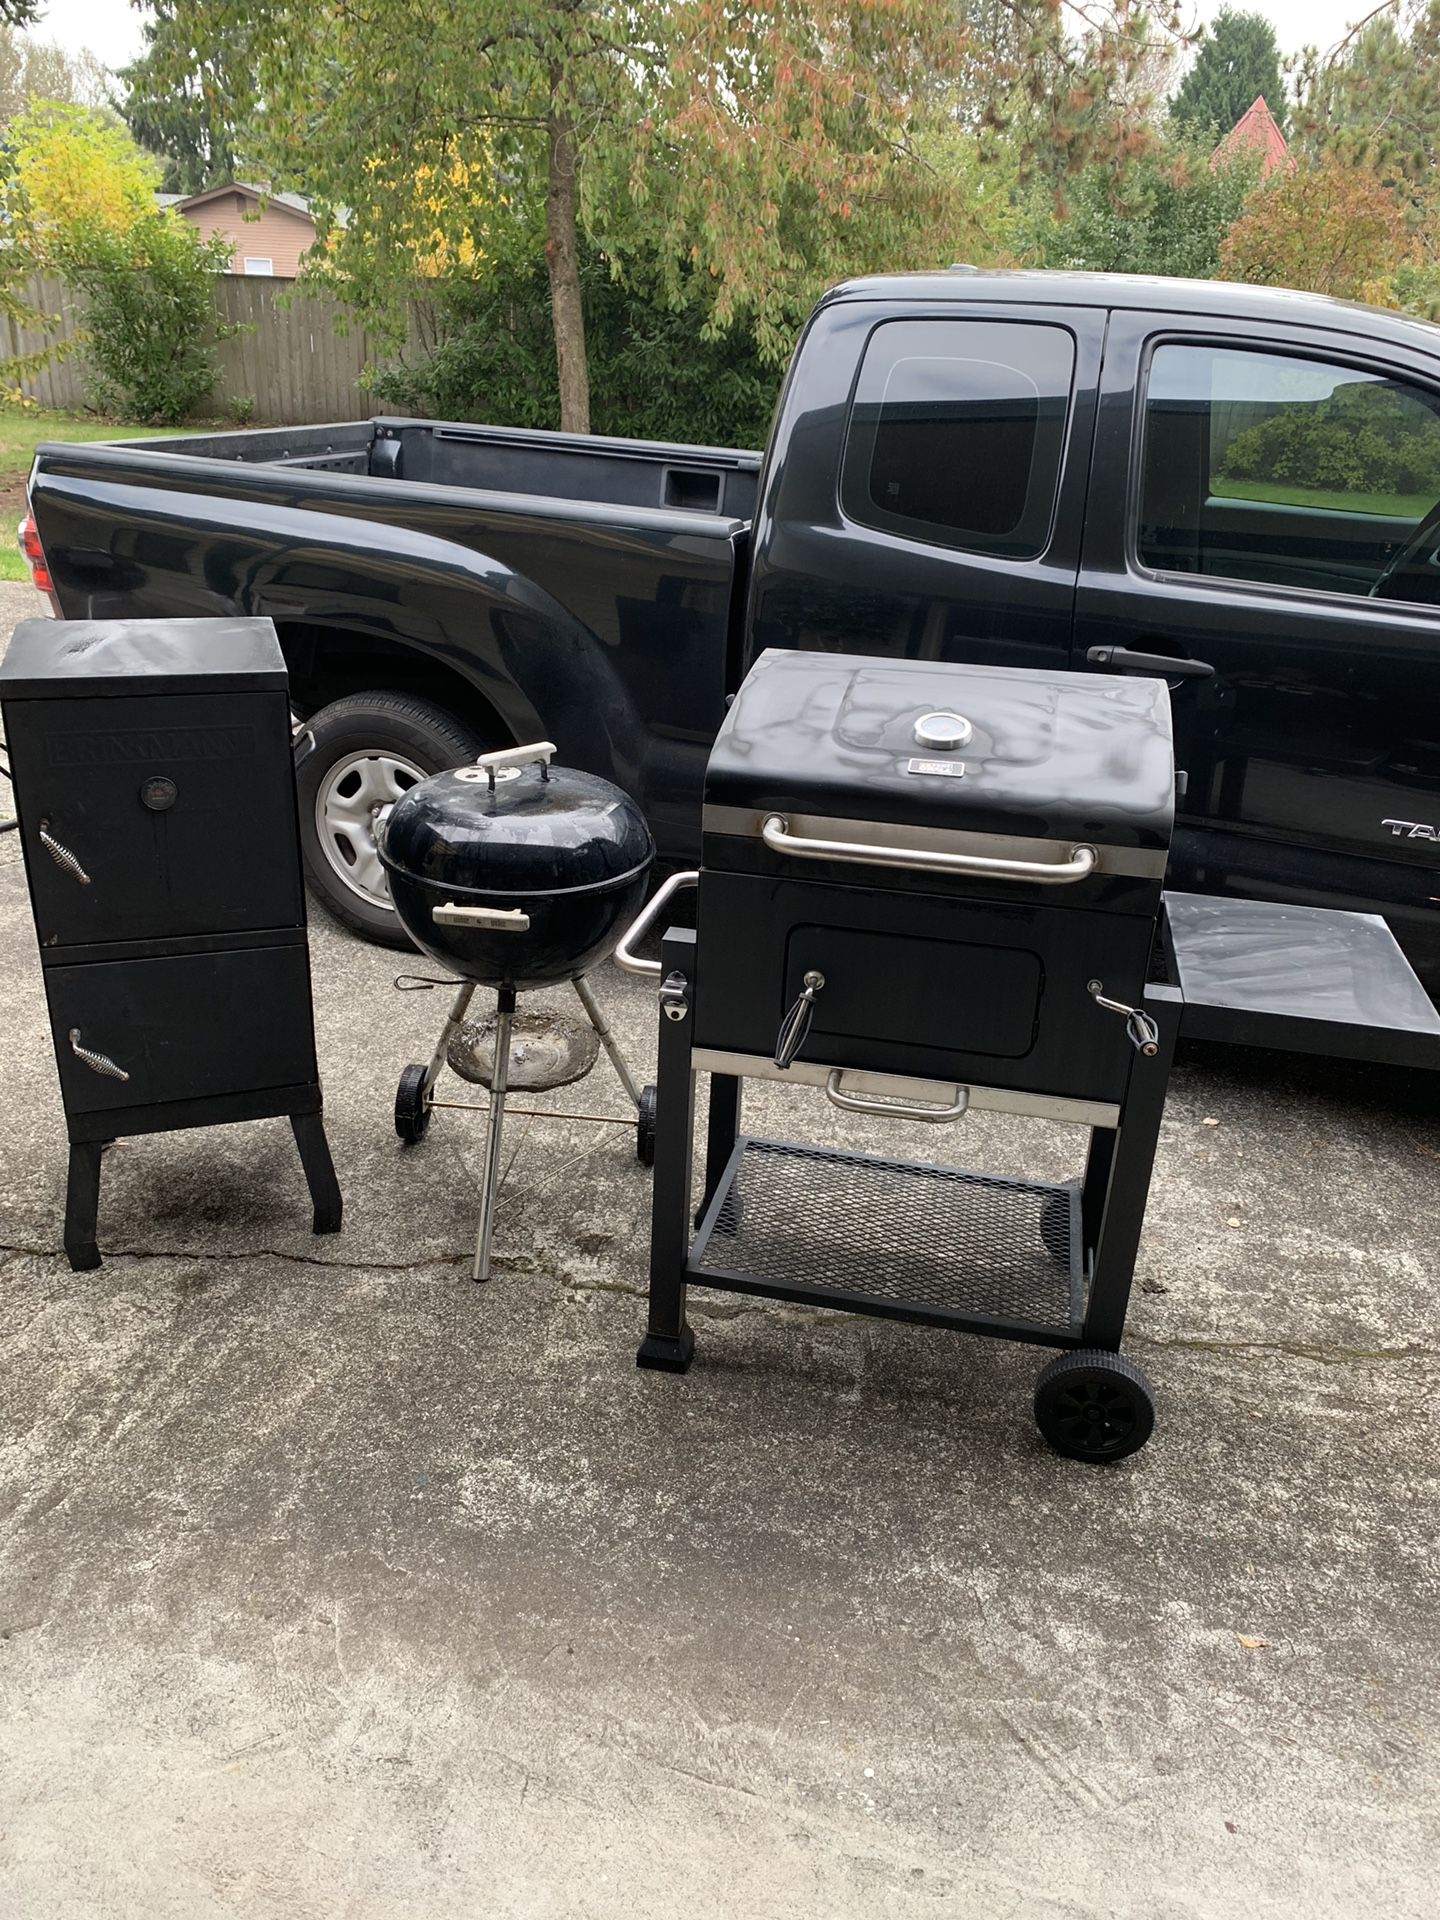 Bbq smoker, Weber and adjustable grill package